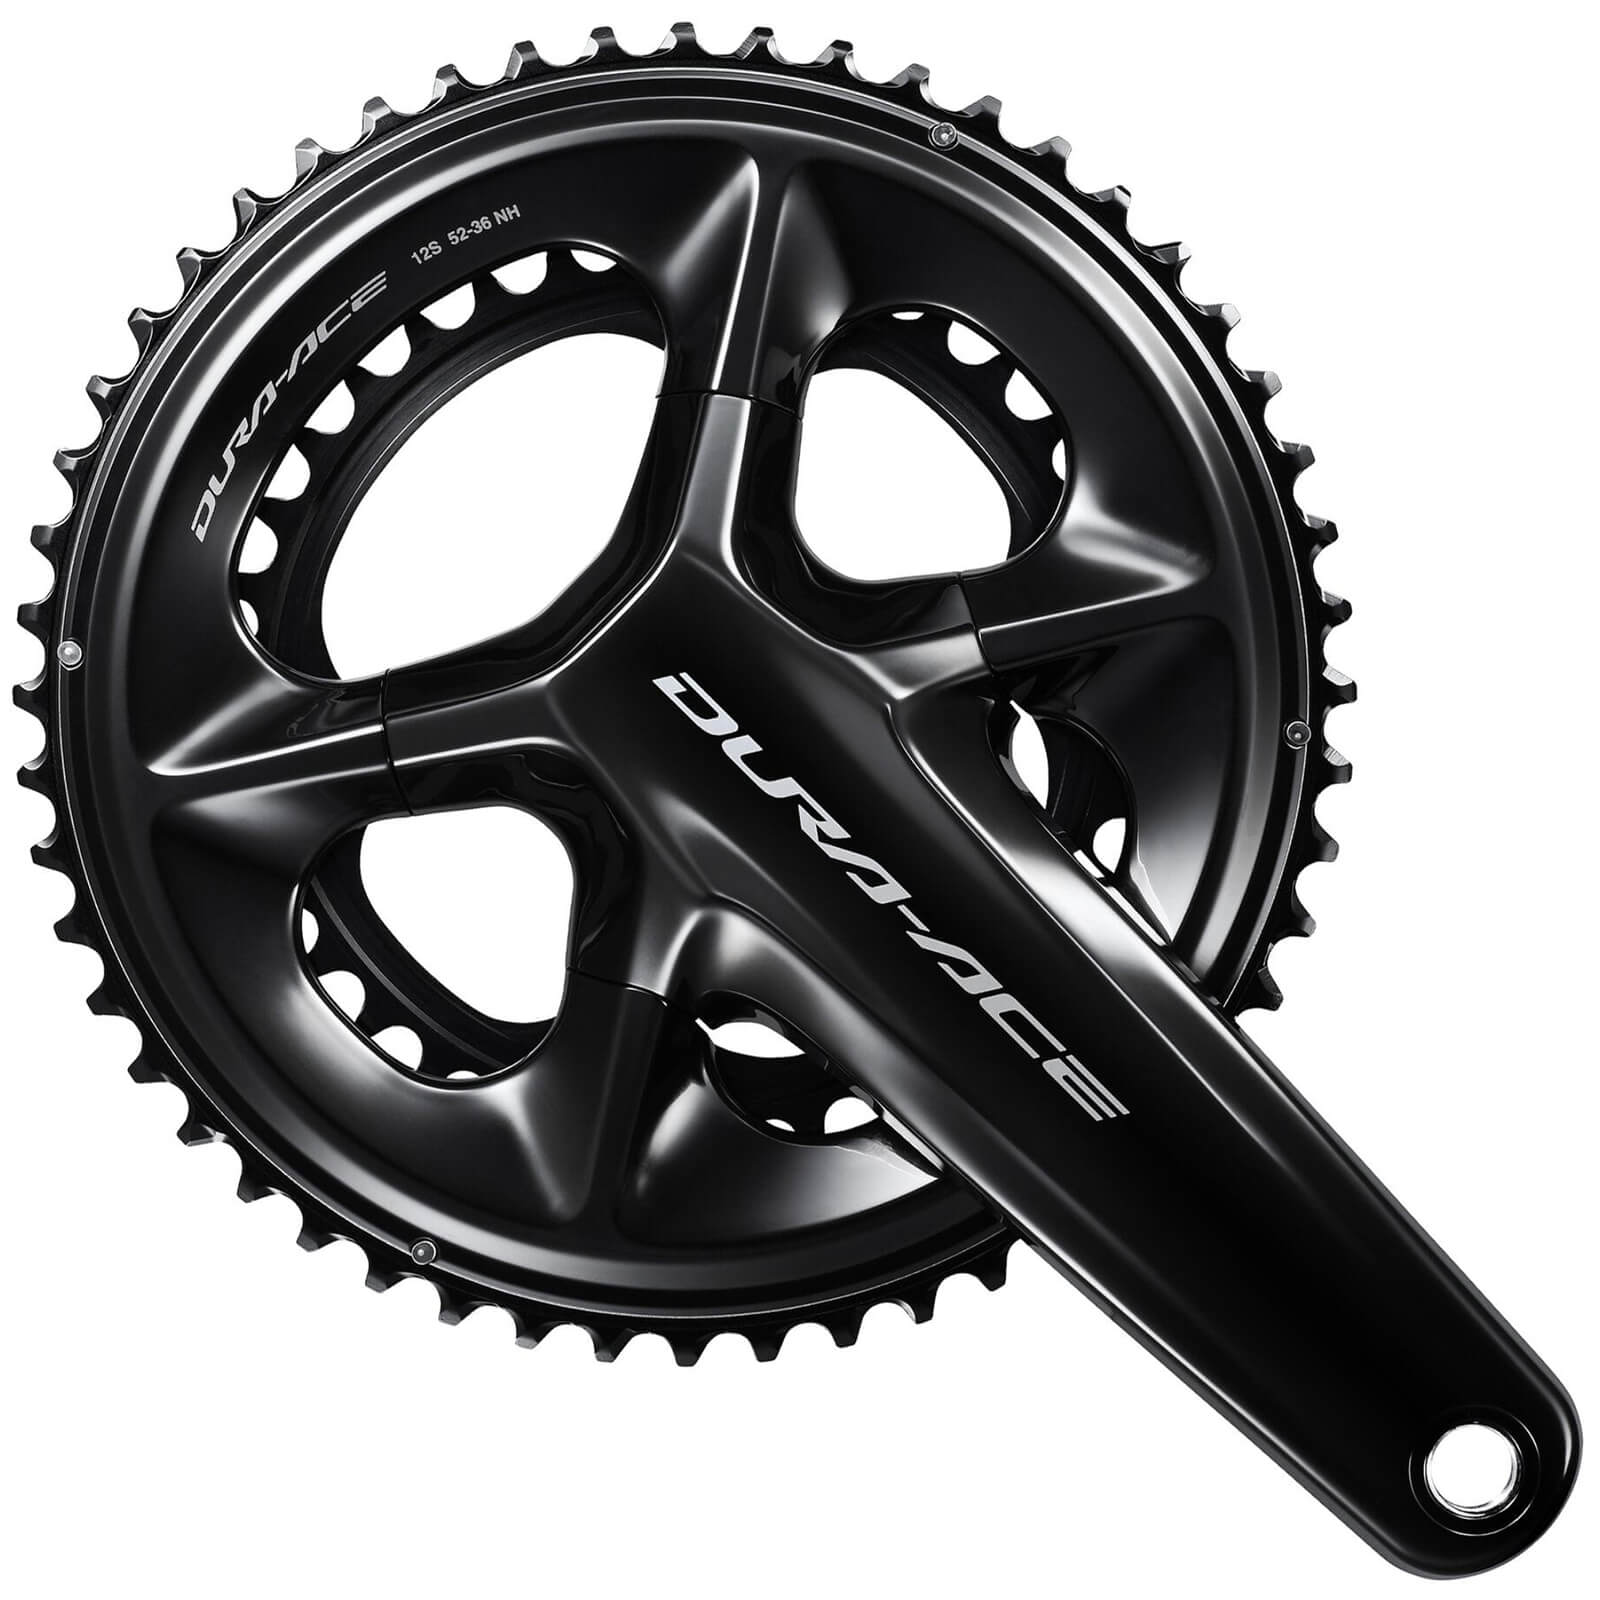 Shimano Dura-Ace R9200 Chainset - 170mm - 52/36